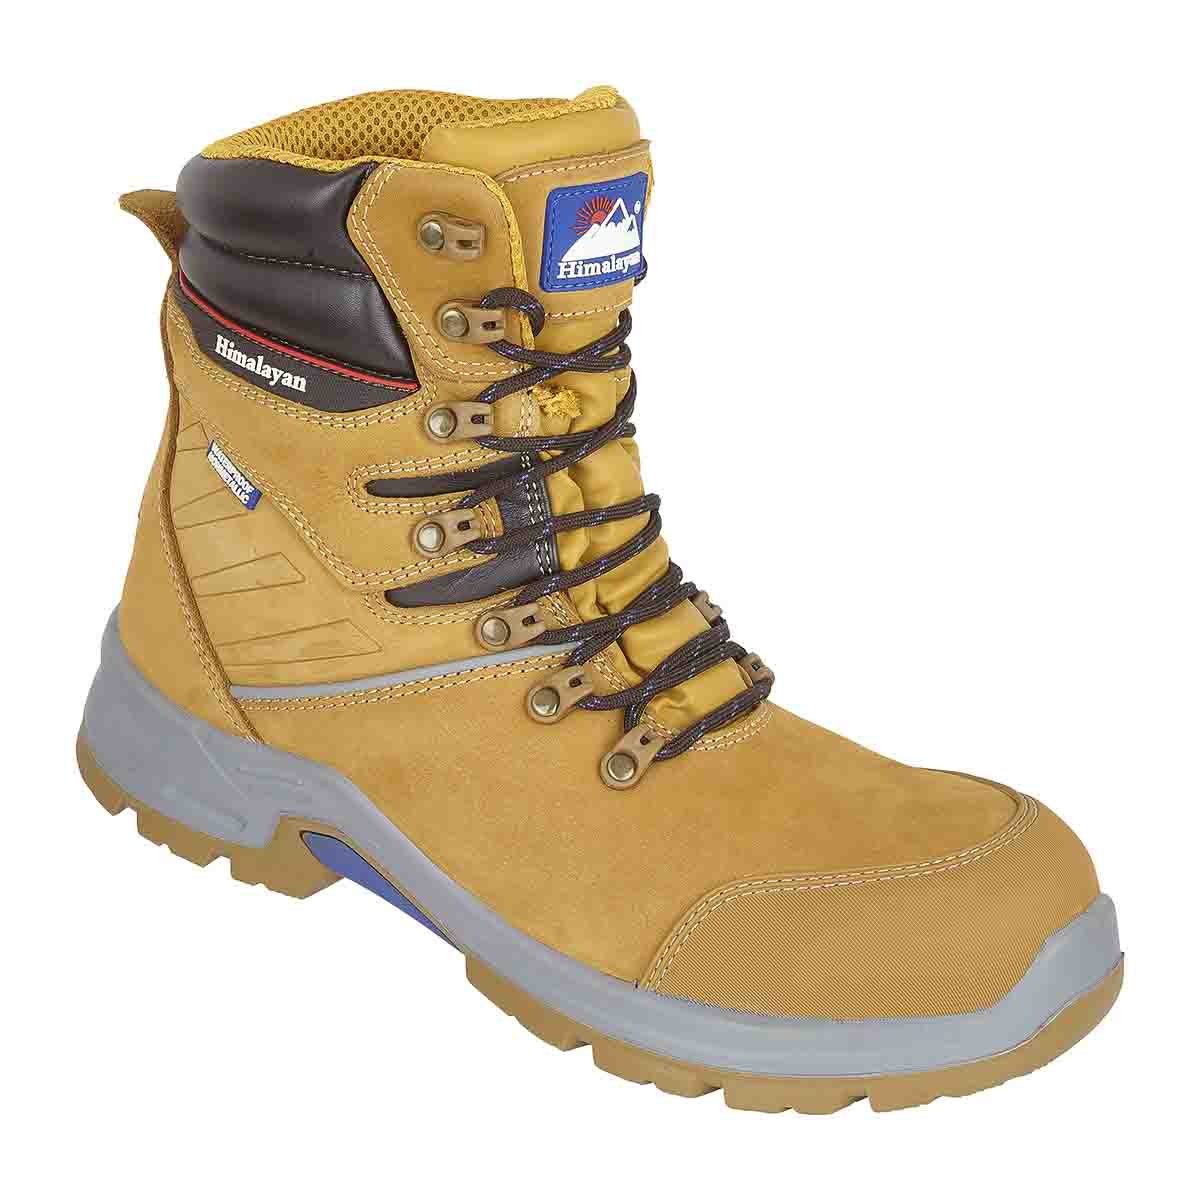 Himalayan 5211 Honey Non Metallic Toe Capped Ankle Safety Boots, UK 13, EU 48